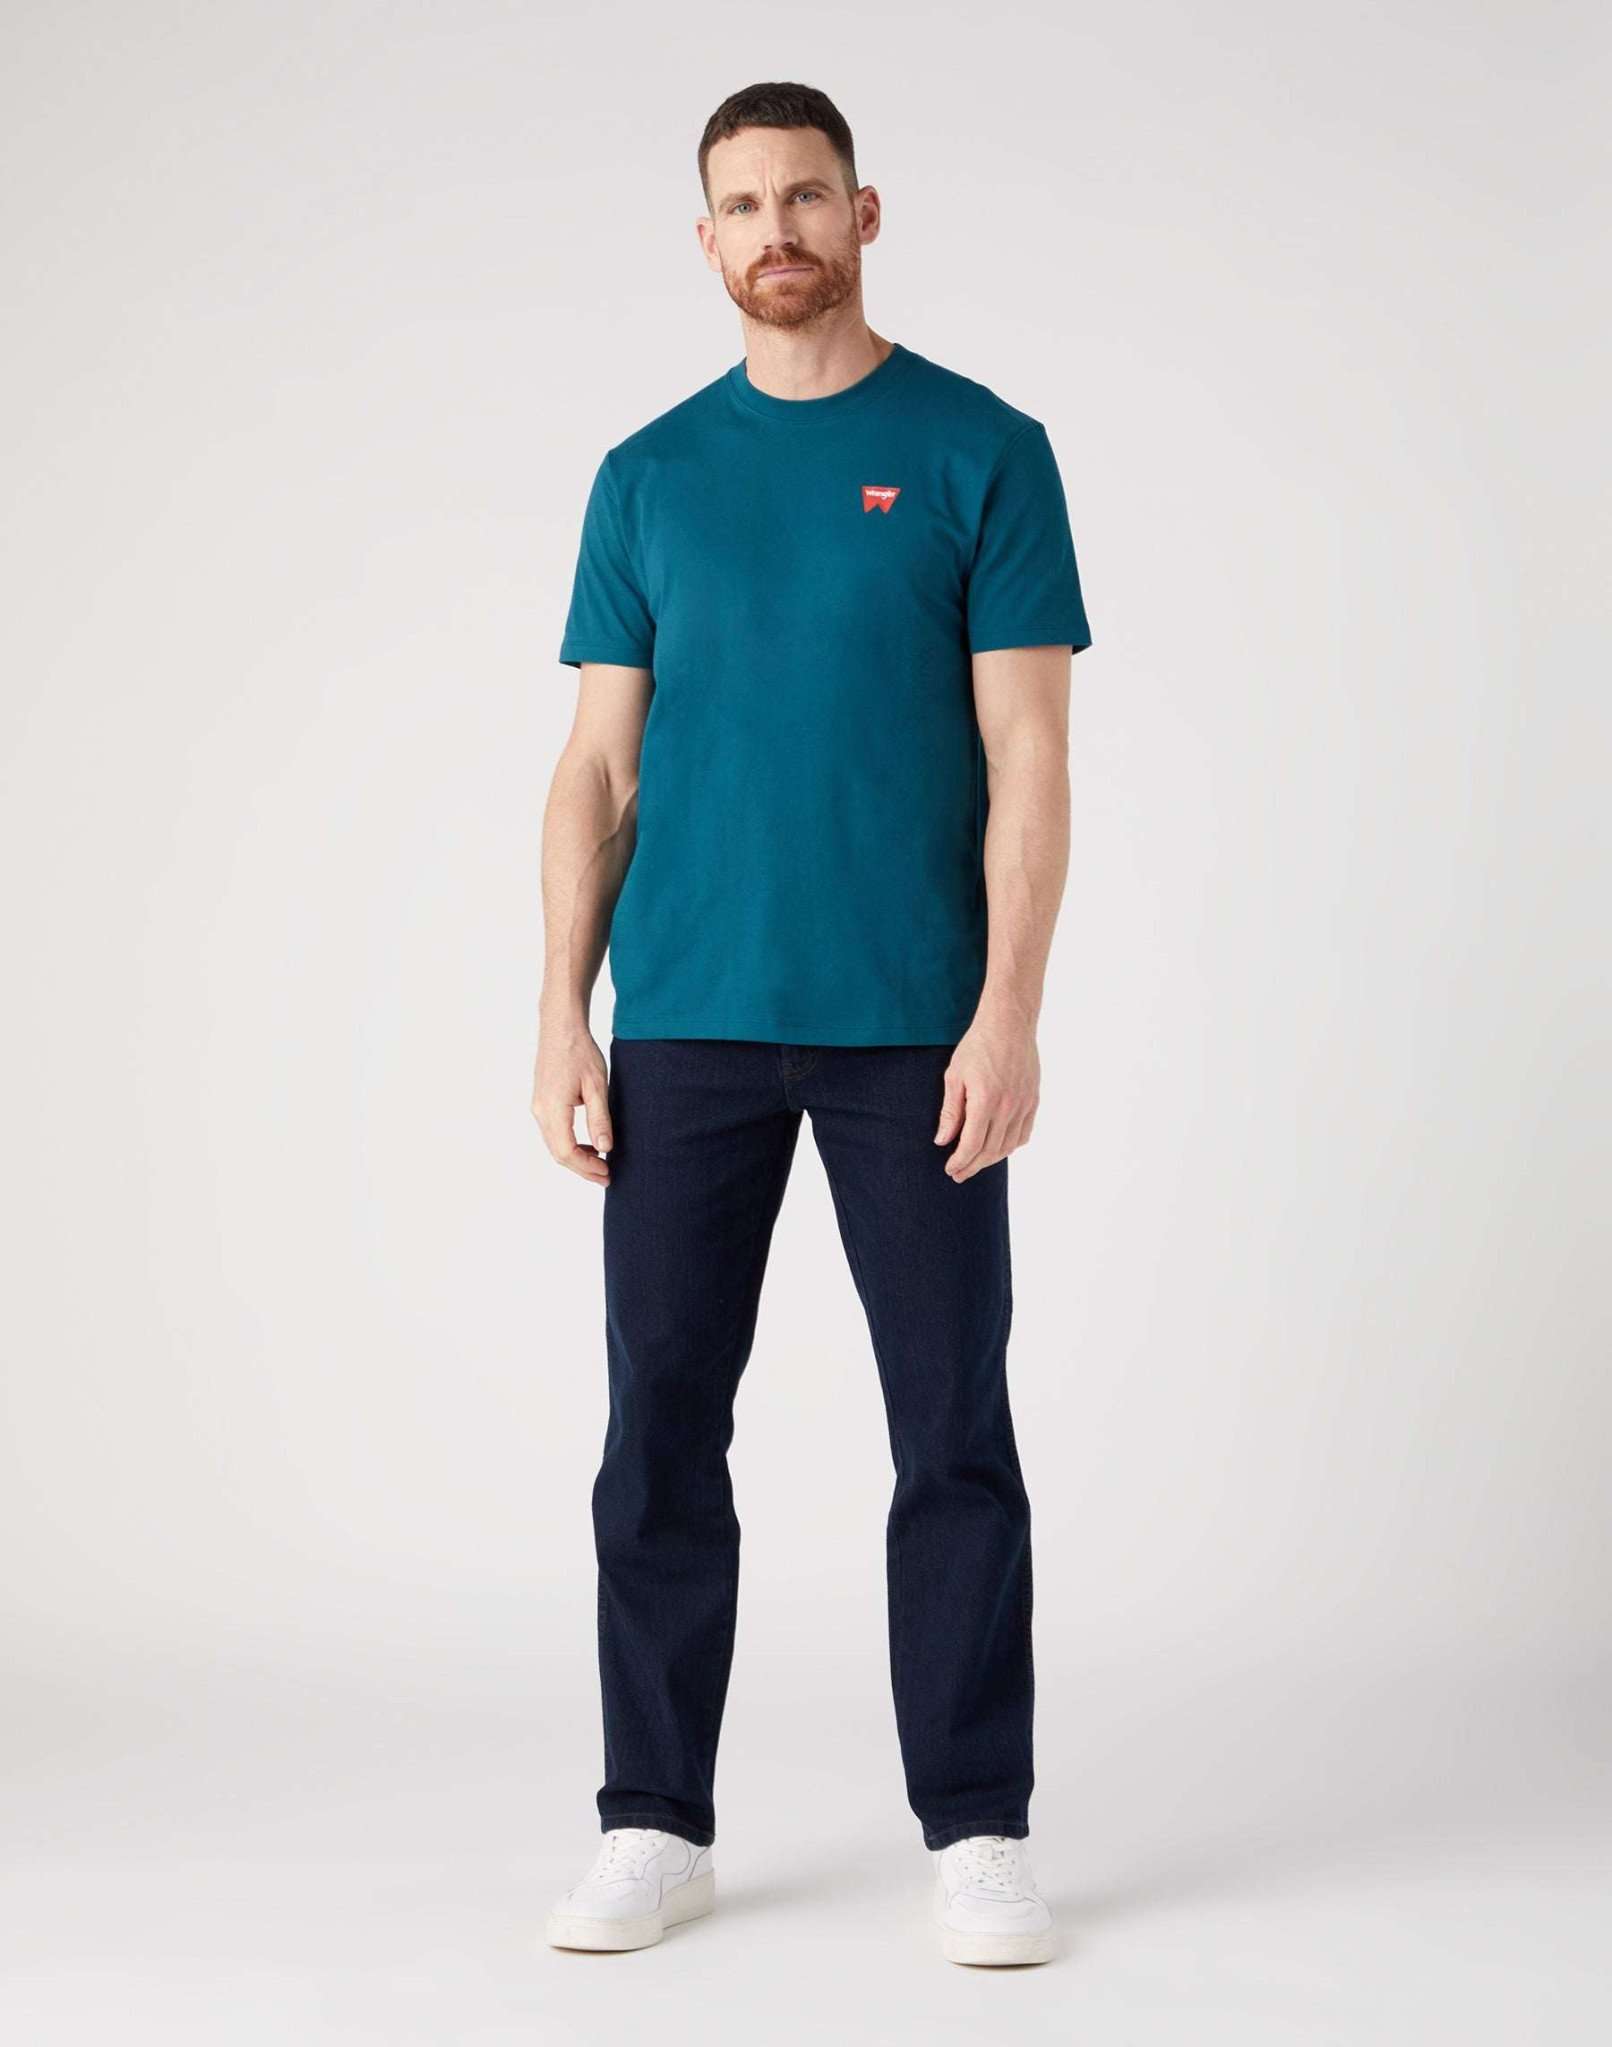 Sign Off Tee in Deep Teal Green Pullover Wrangler   